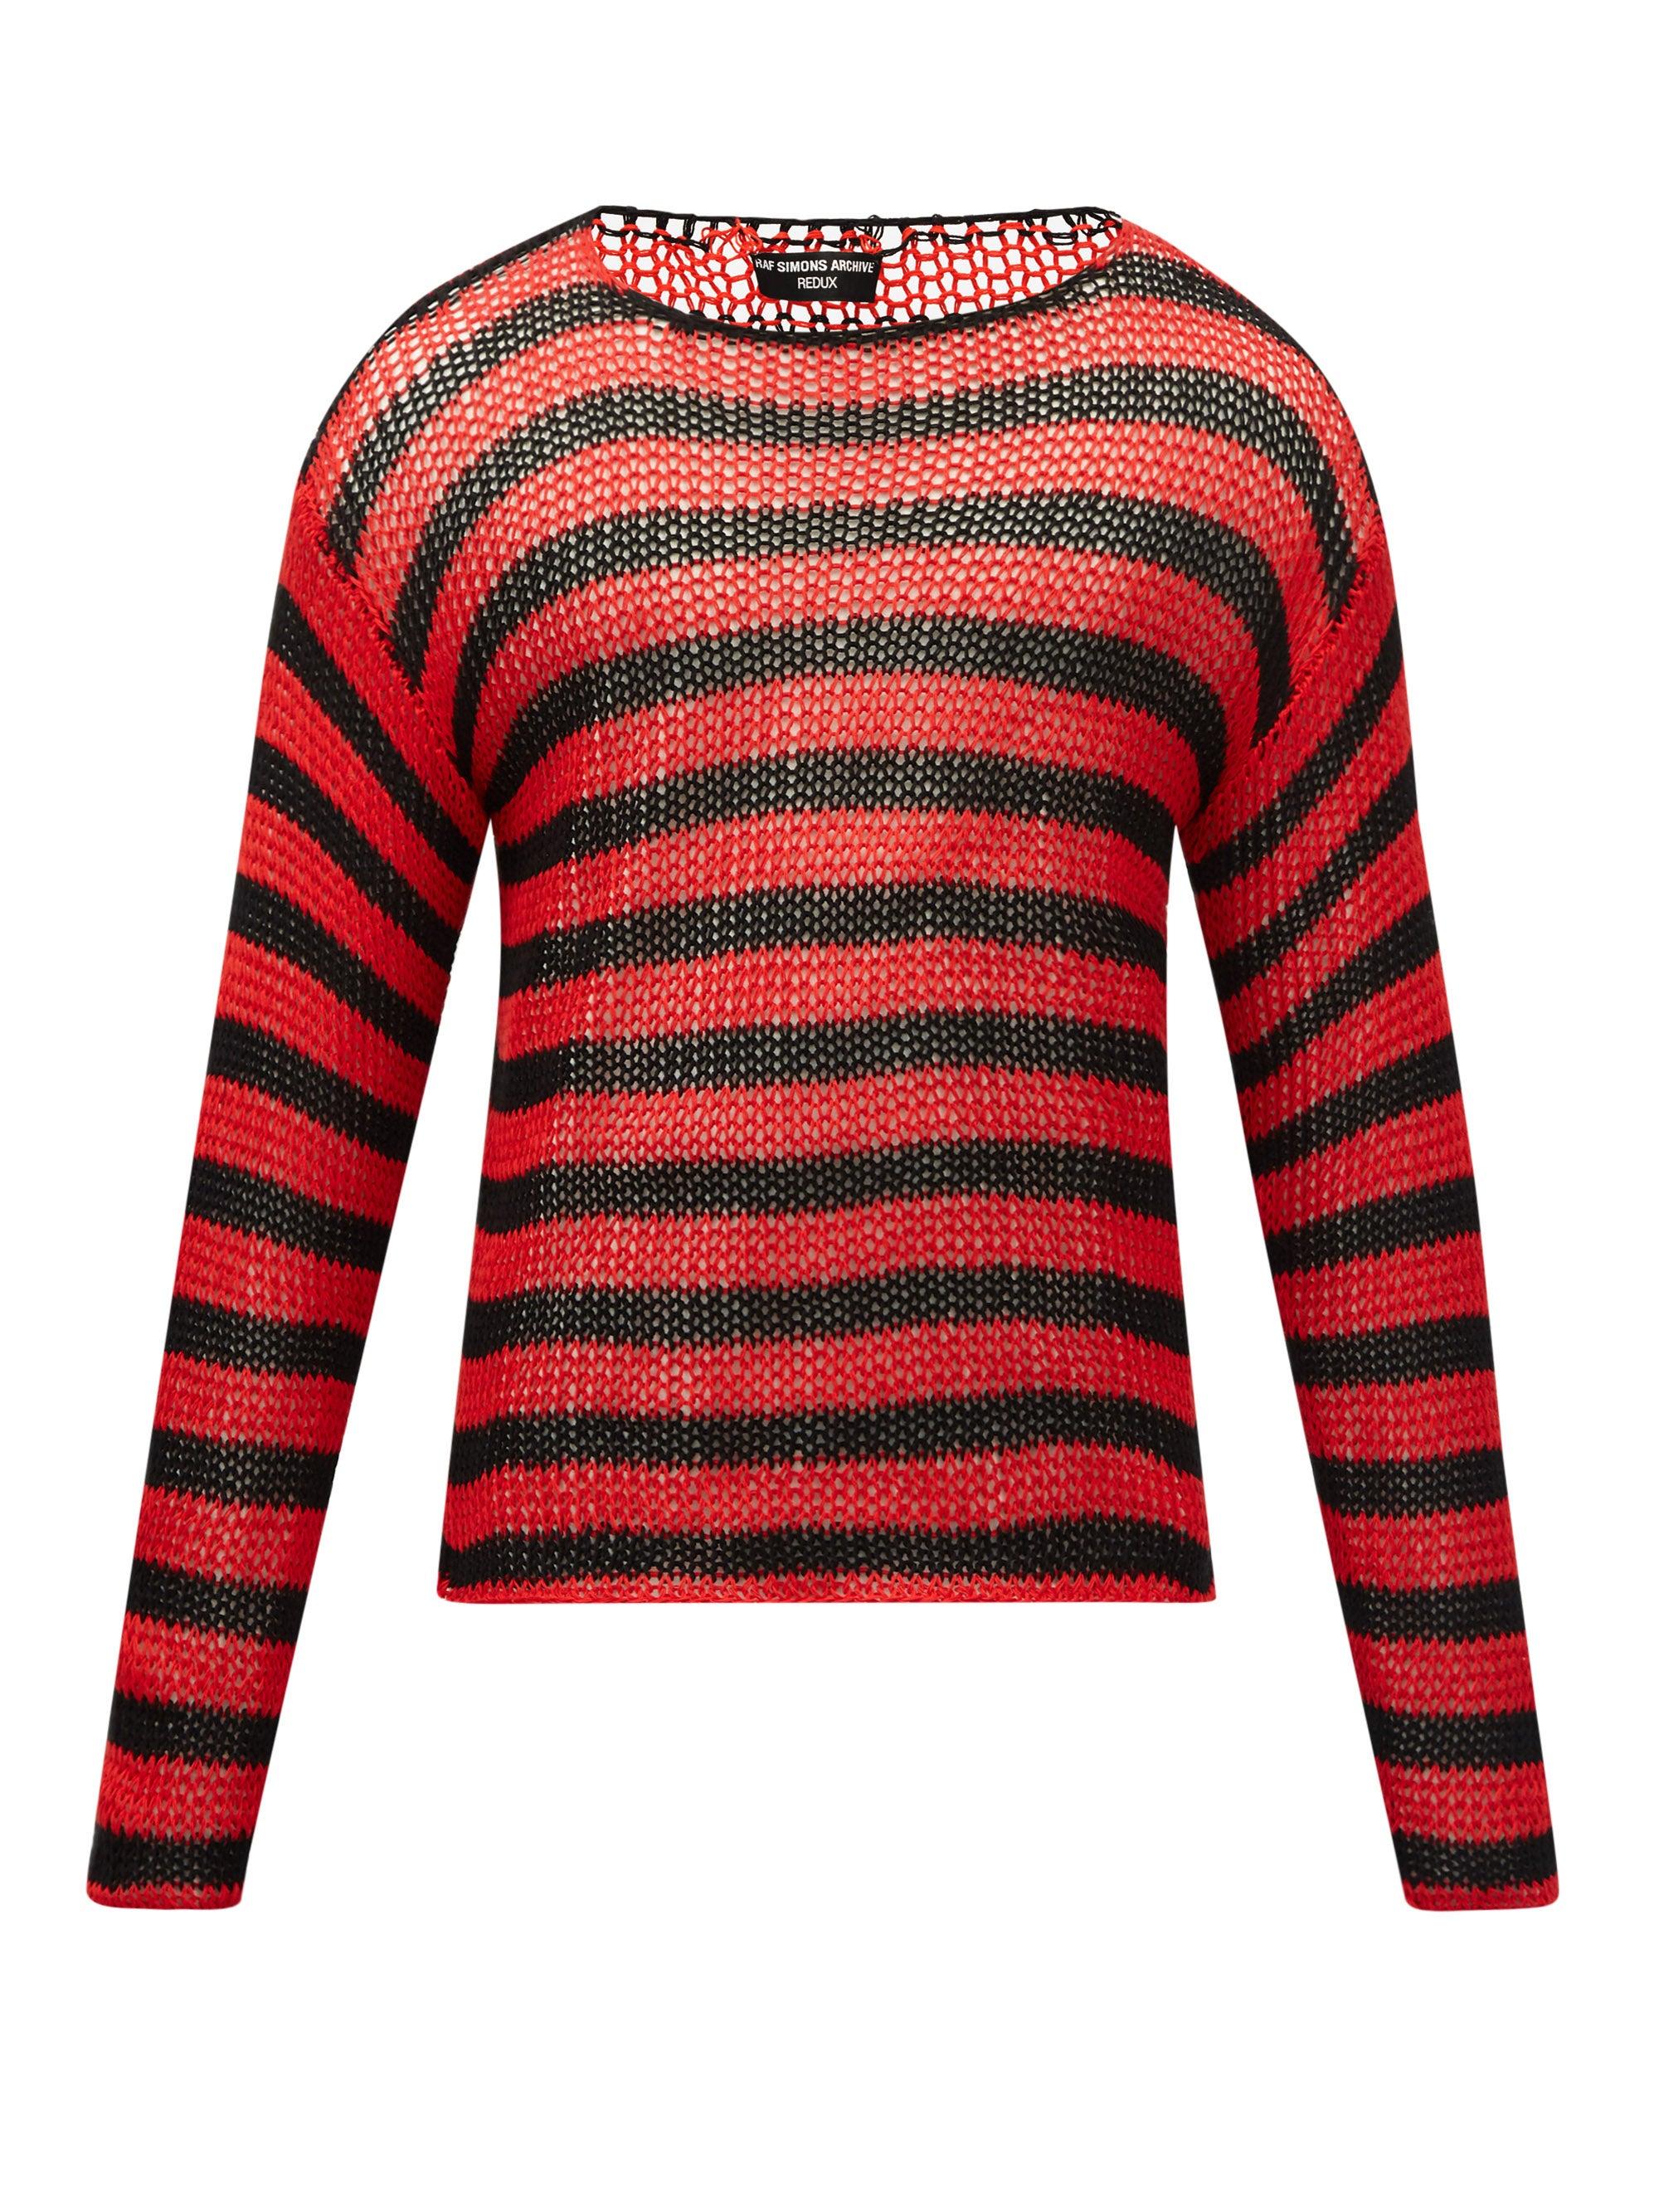 Raf Simons Ss97 Striped Open-knit Cotton Sweater in Black Red (Red) for Lyst